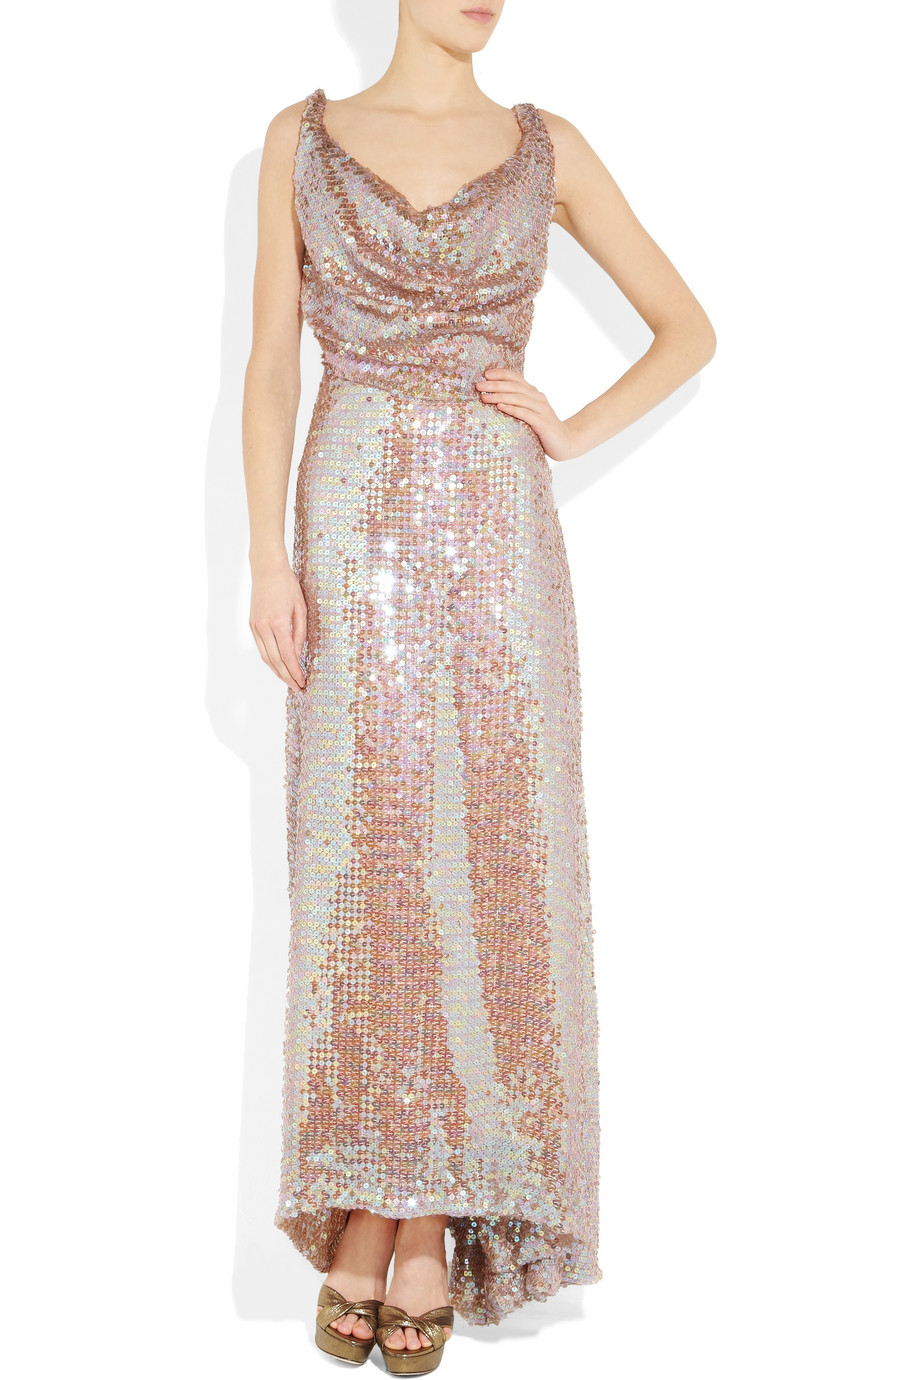 Lyst - Vivienne westwood gold label Long Savannah Sequined Net Gown in Pink